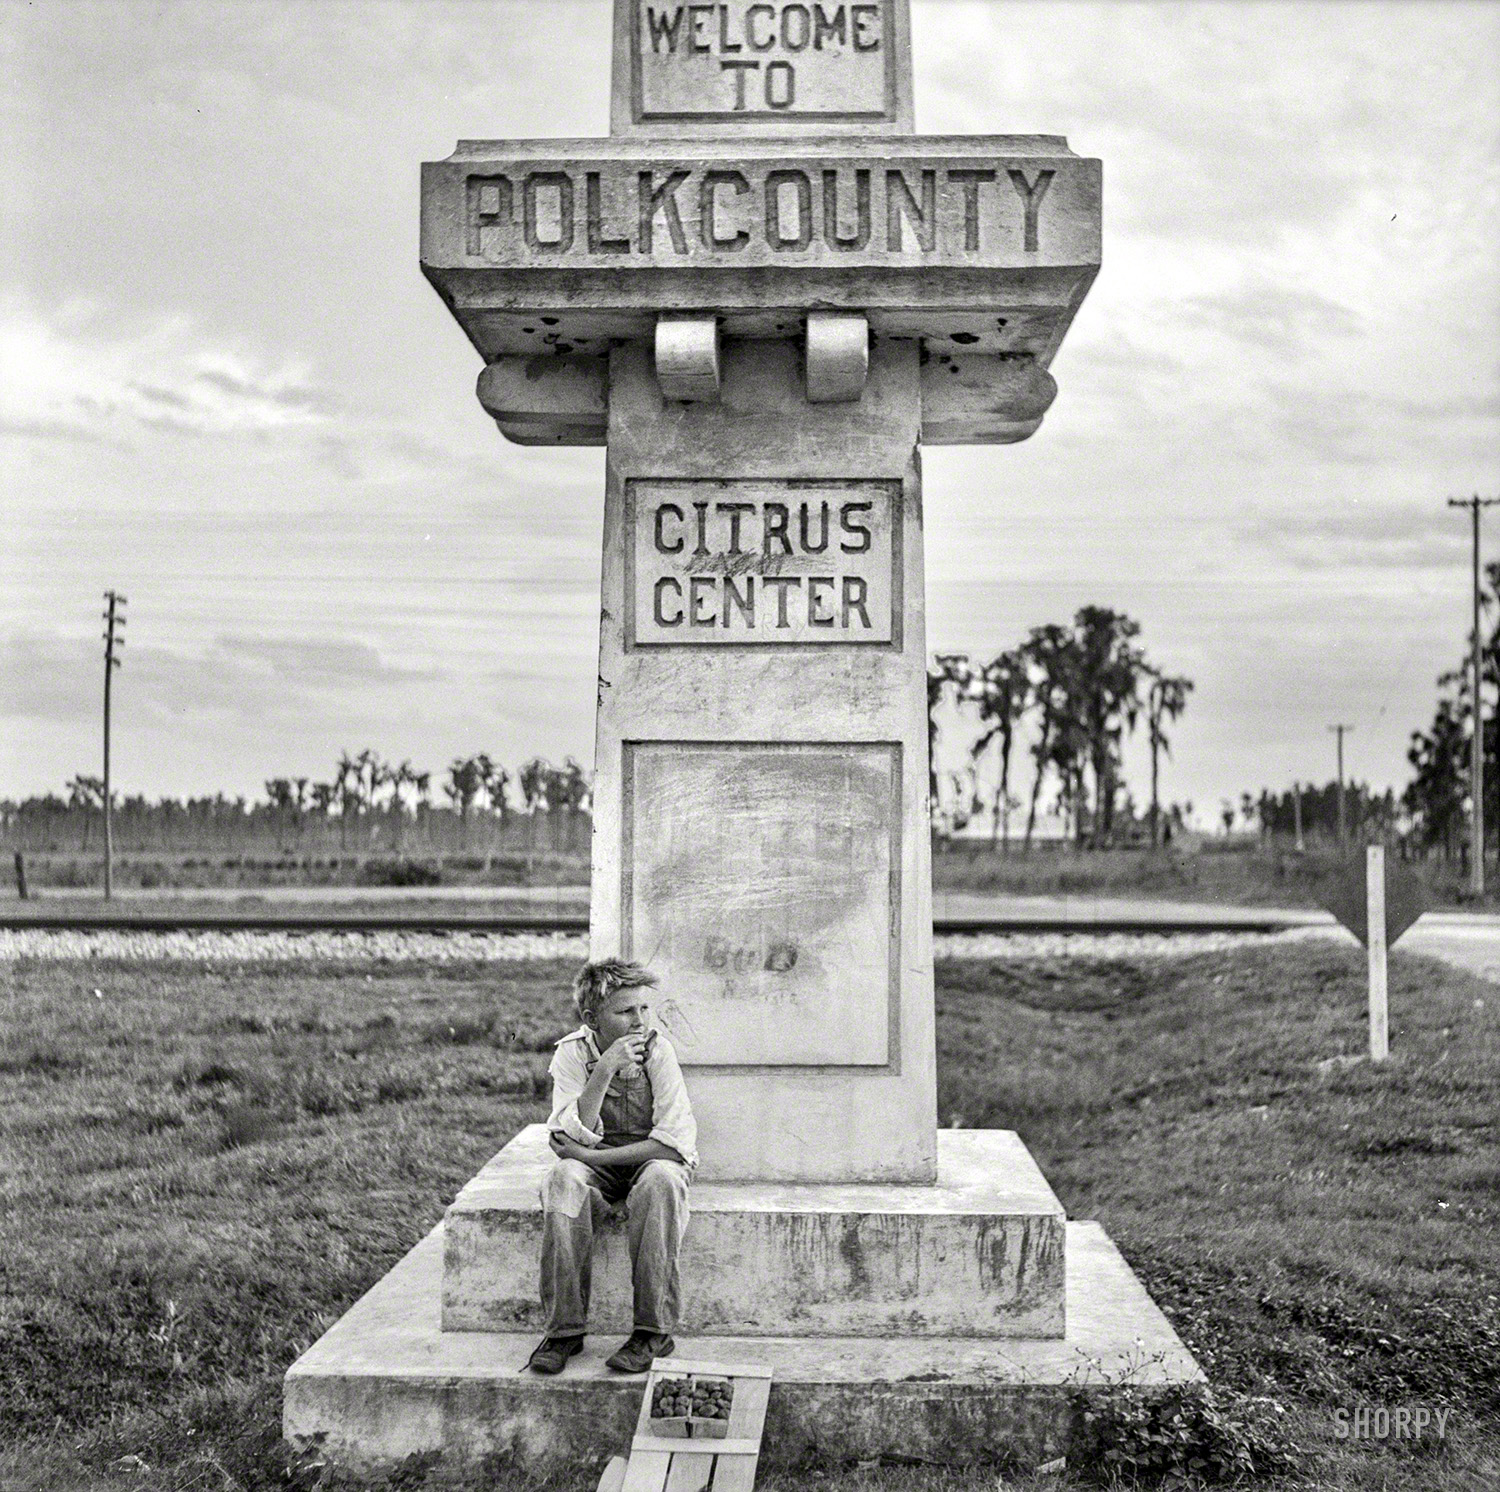 January 1937. "Highway marker in Polk County, Florida." Medium format negative by Arthur Rothstein for the Farm Security Administration. View full size.